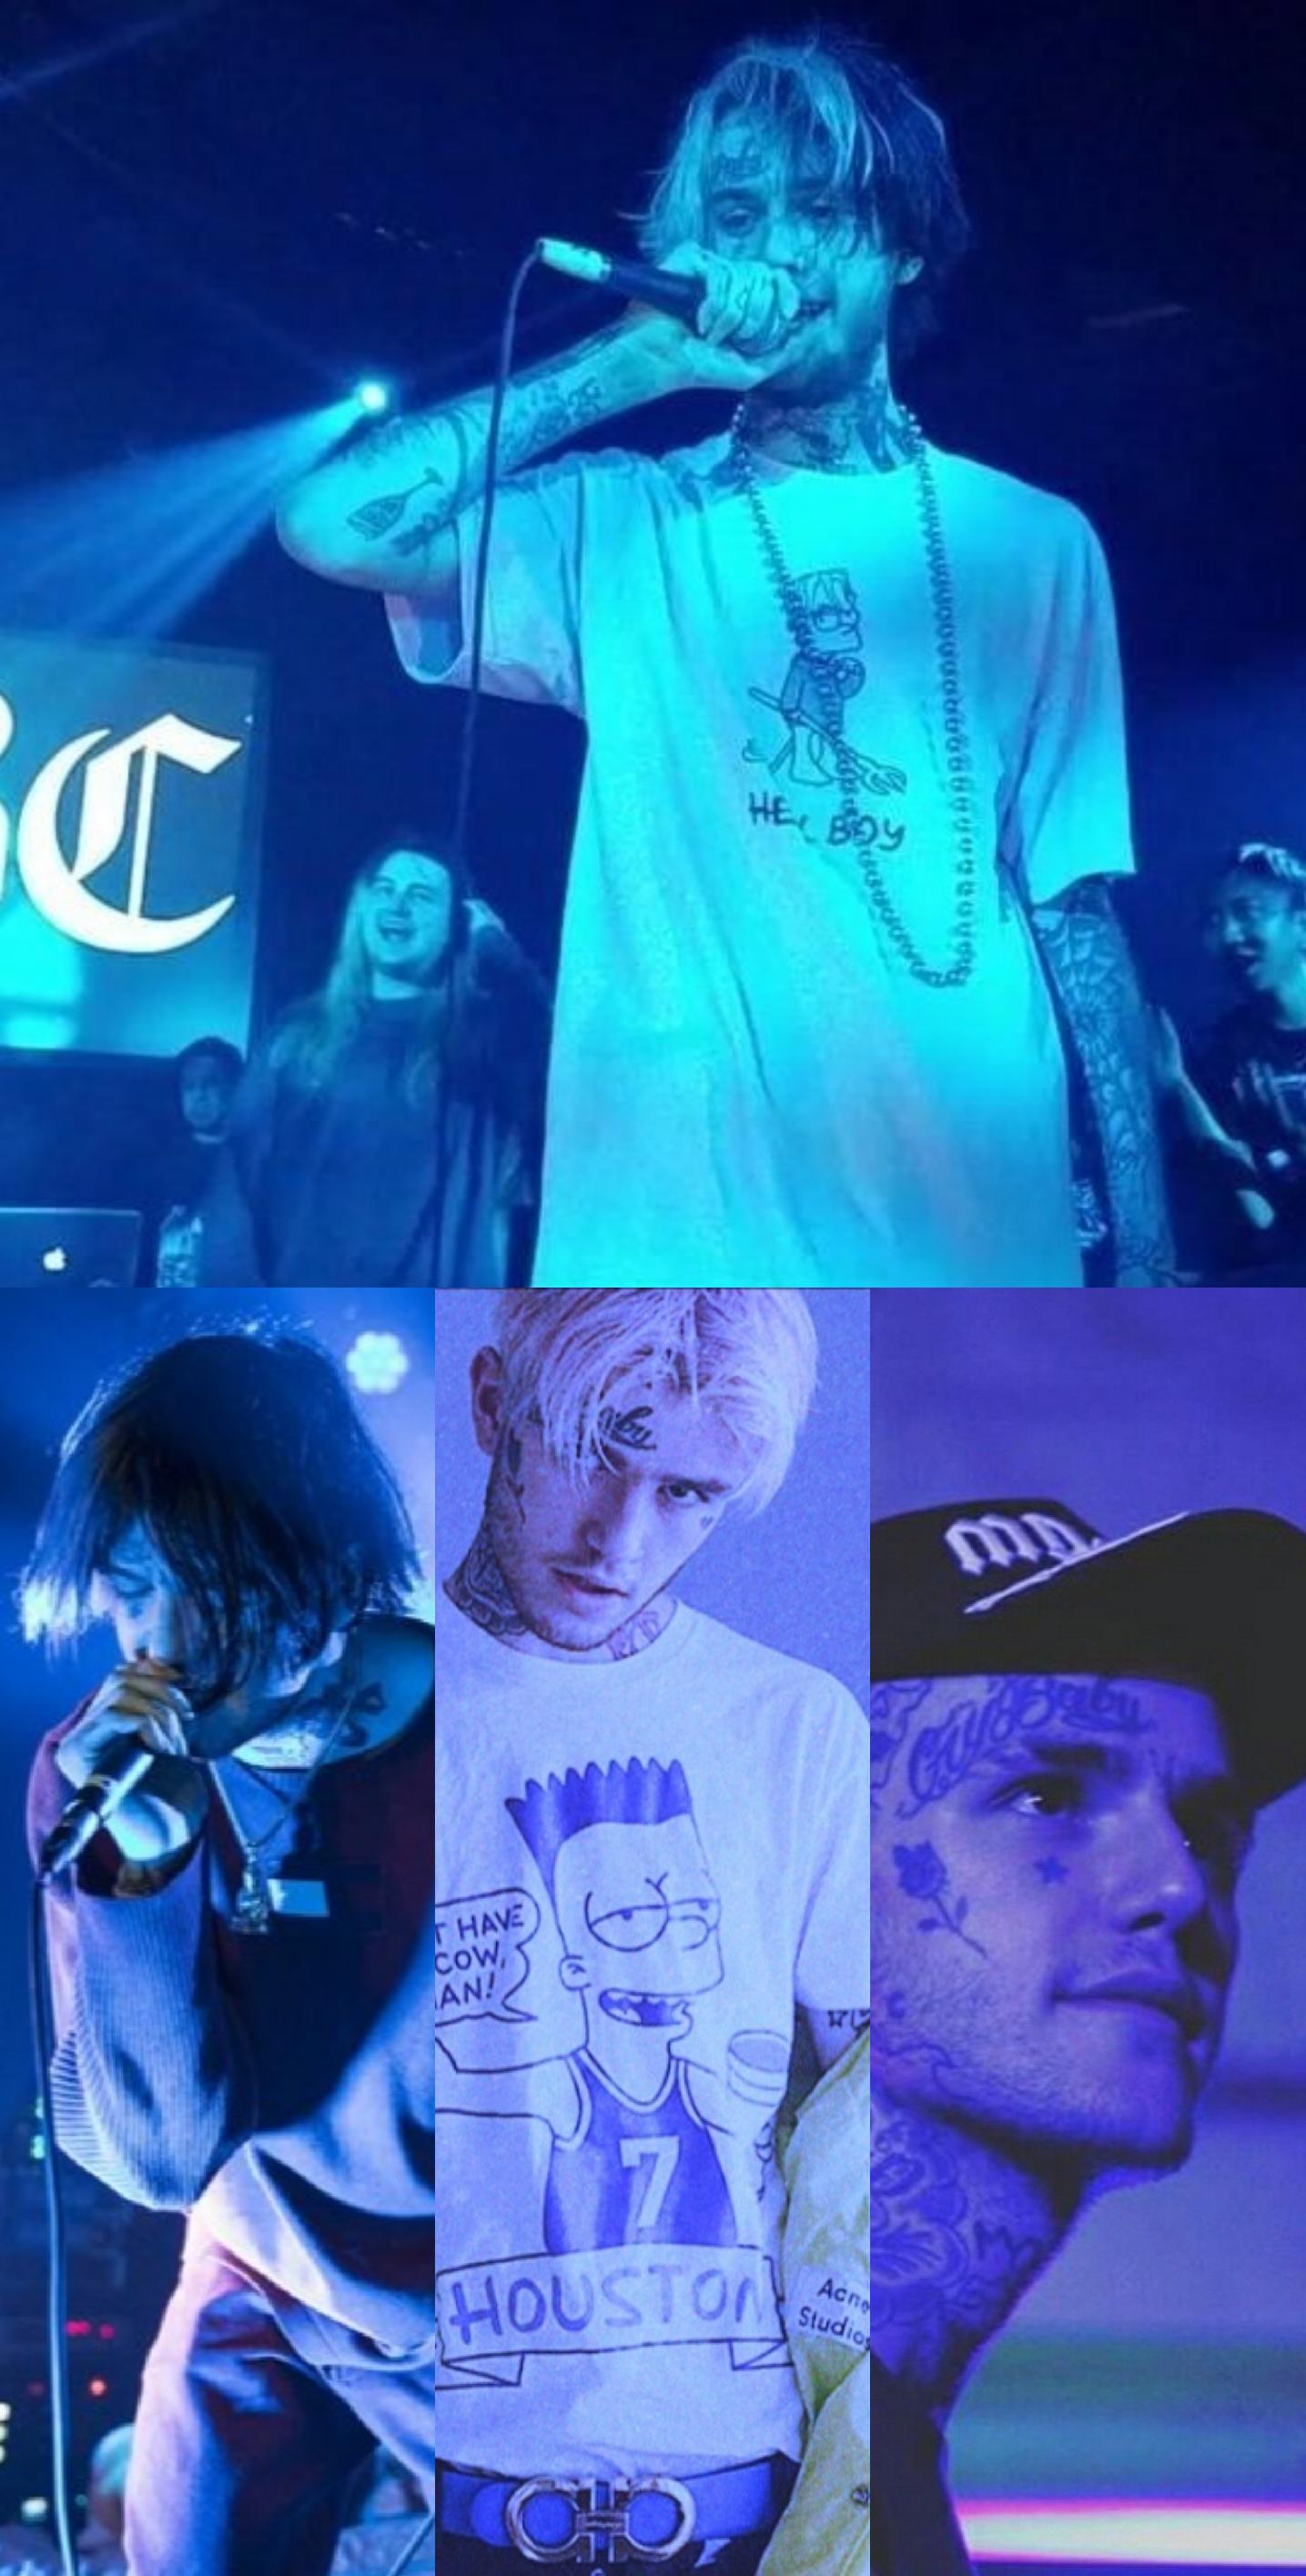 Lil Peep blue aesthetic wallpaper (got the idea from someone else on this subreddit)